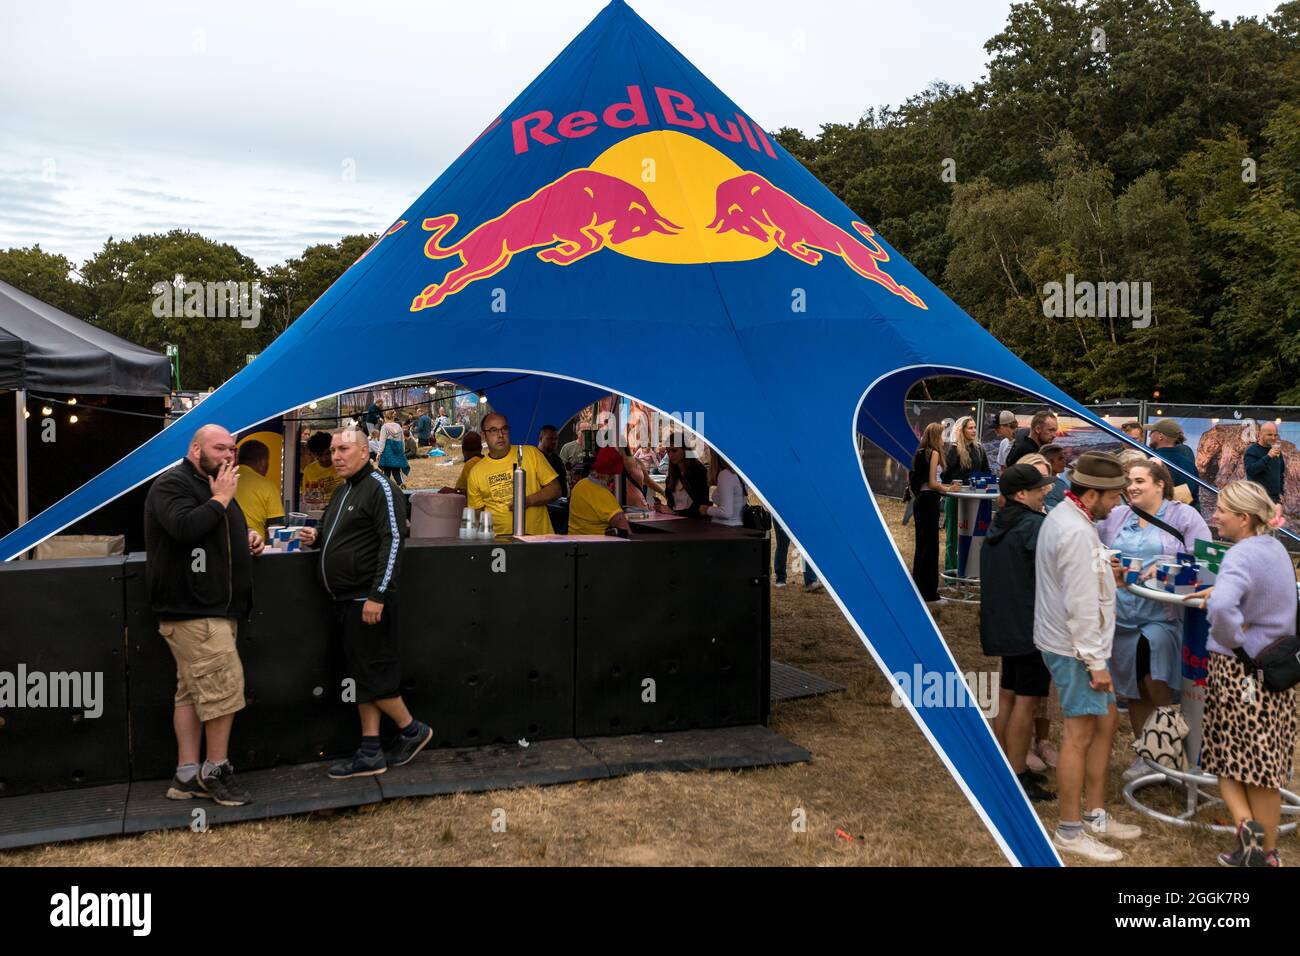 BORNHOLM, DENMARK - Aug 06, 2021: A big blue Red Bull tent surrounded by people in a festival in Bornholm, Denmark Stock Photo - Alamy